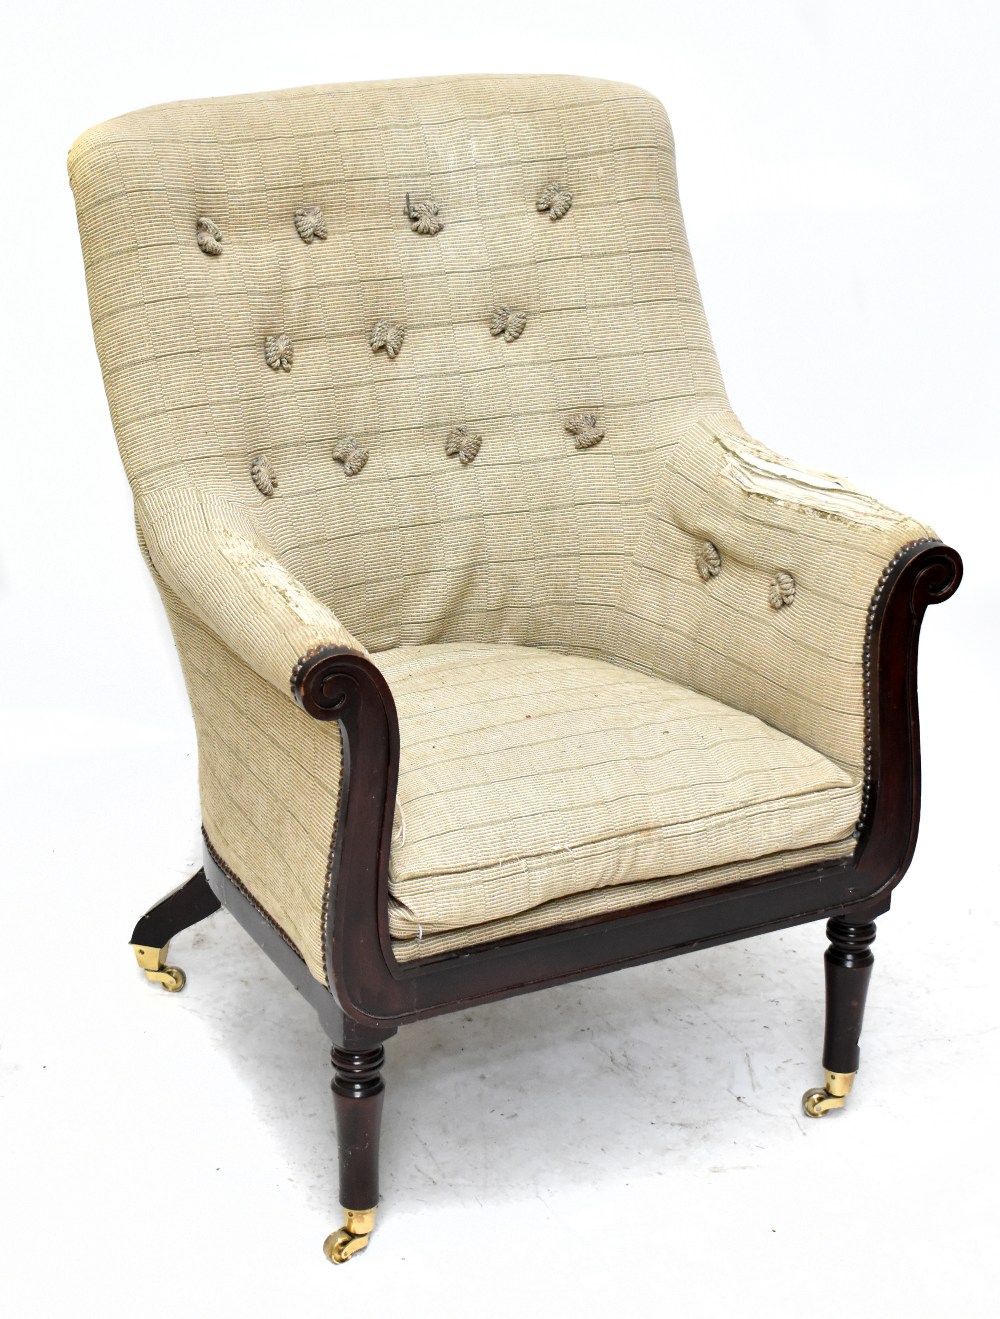 A Georgian style mahogany framed armchair upholstered in a striped button back material raised on